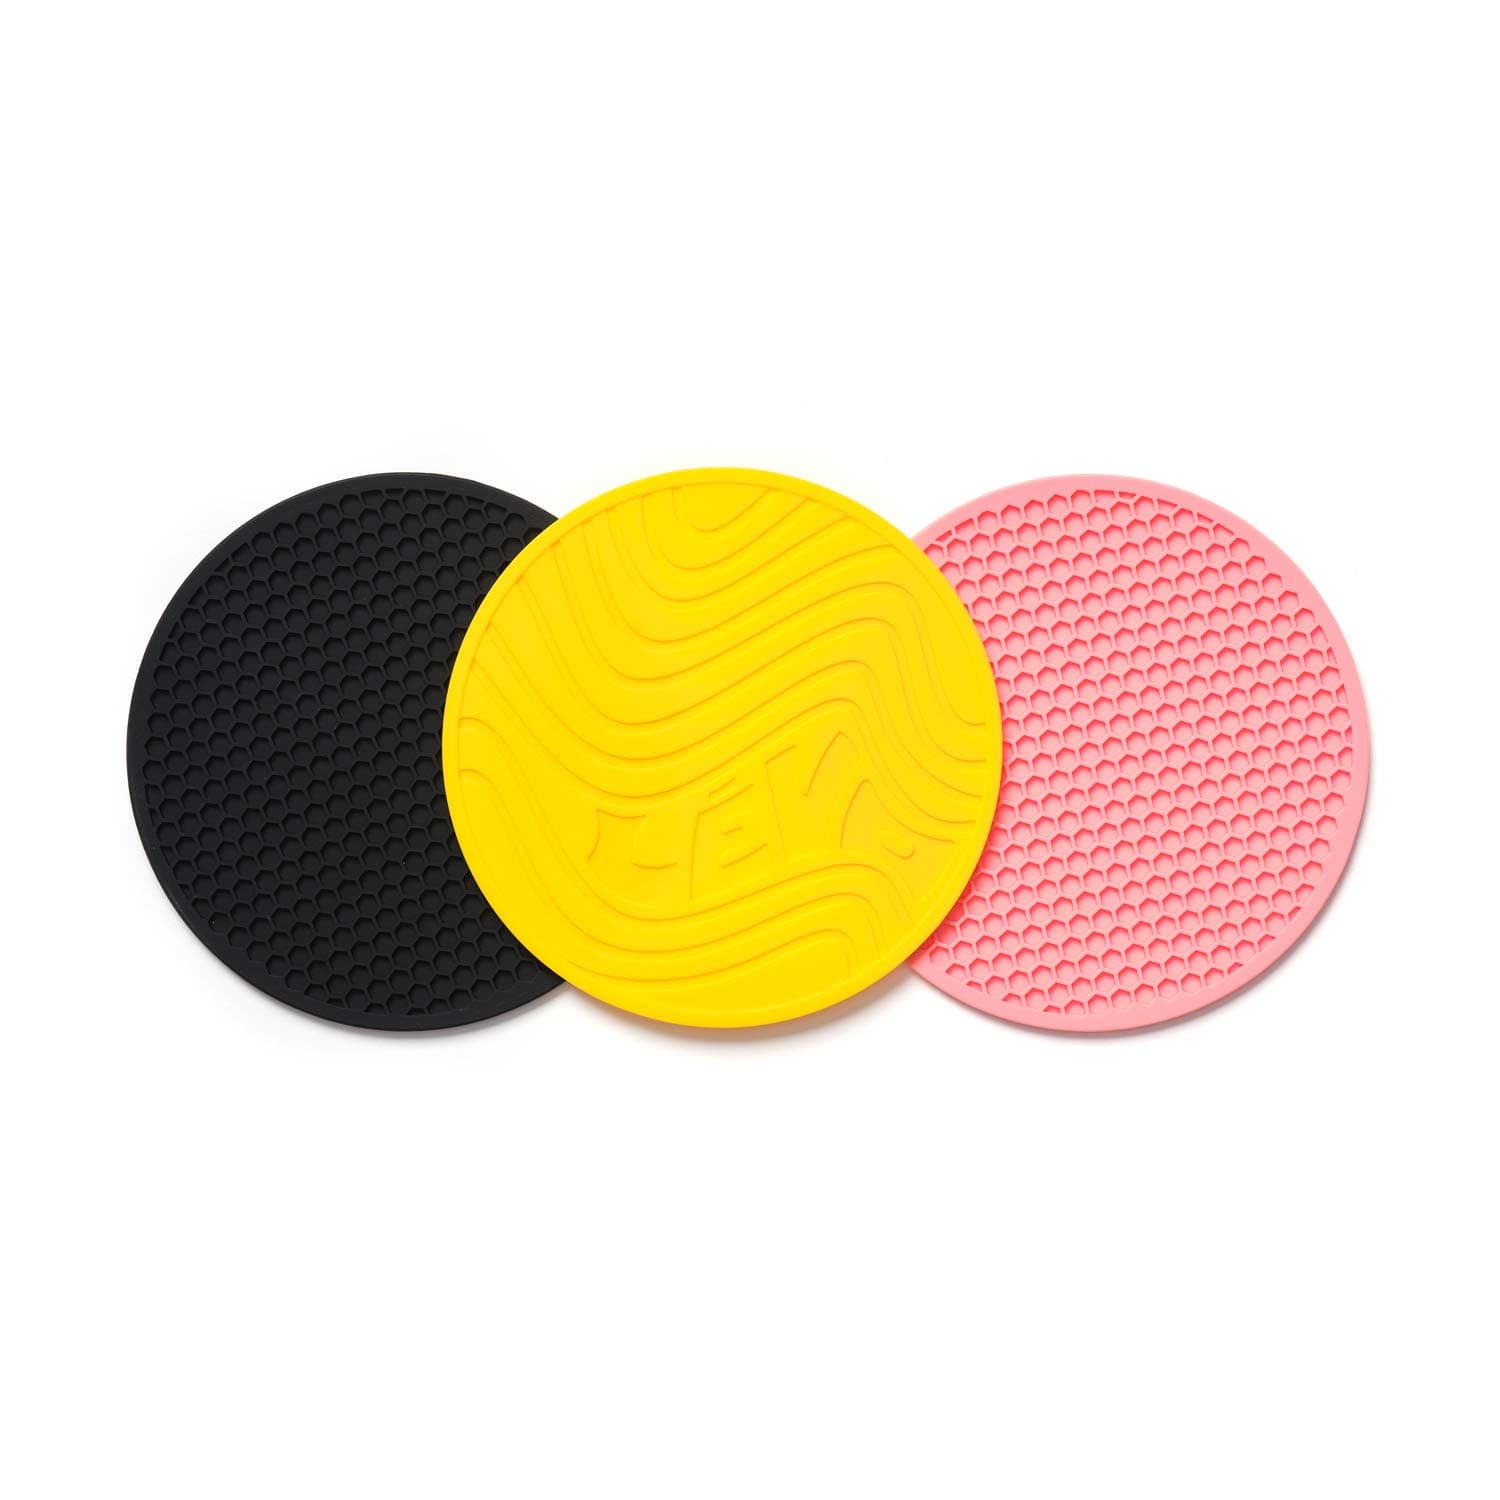 LEVO Silicone Trivets in yellow, pink, and black back part